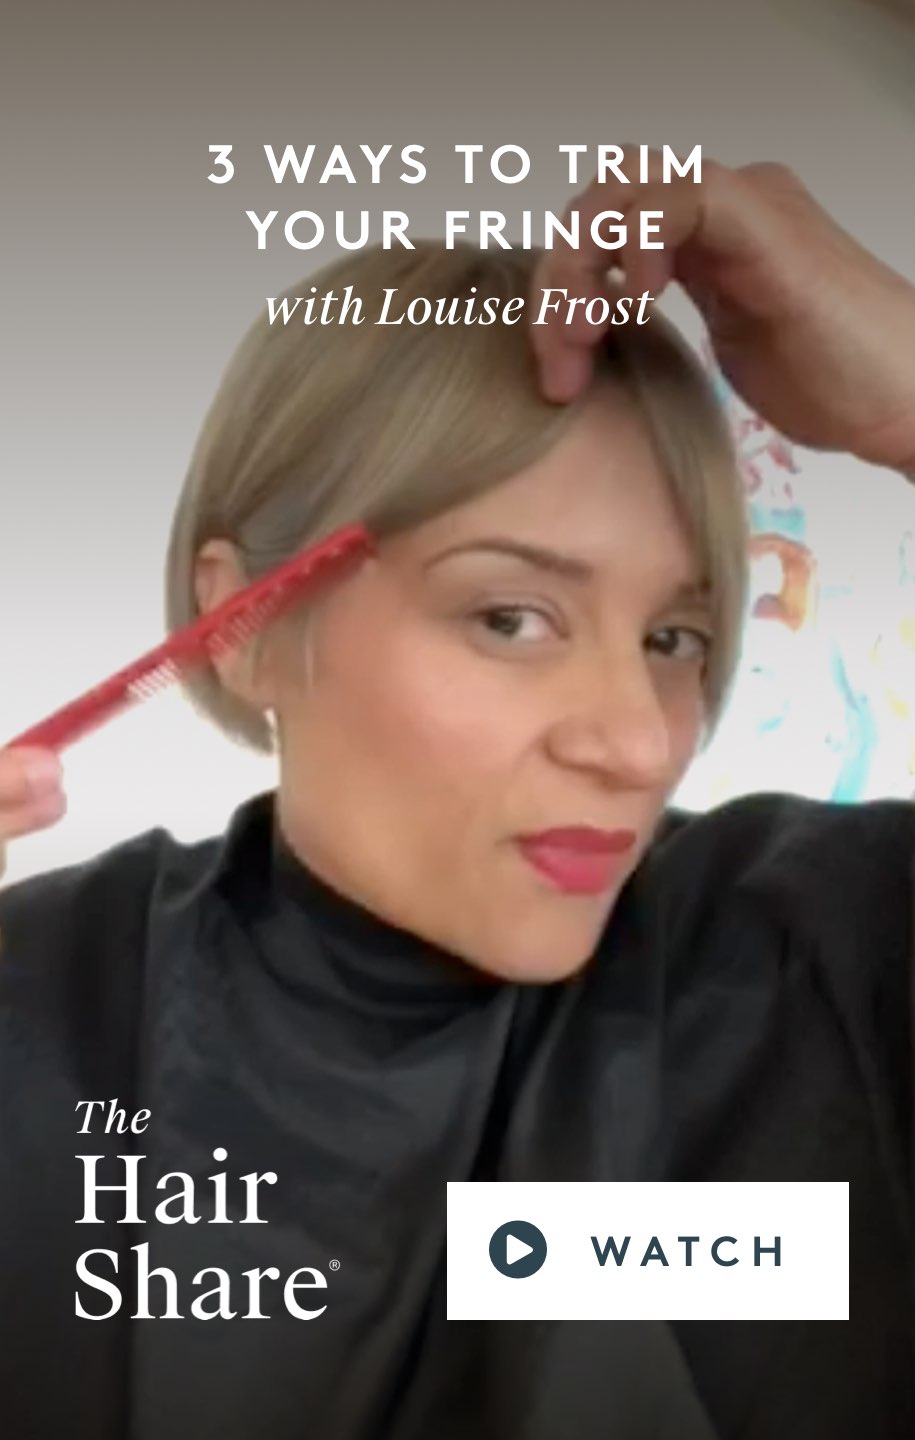 3 Ways To Trim Your Fringe with Louise Frost